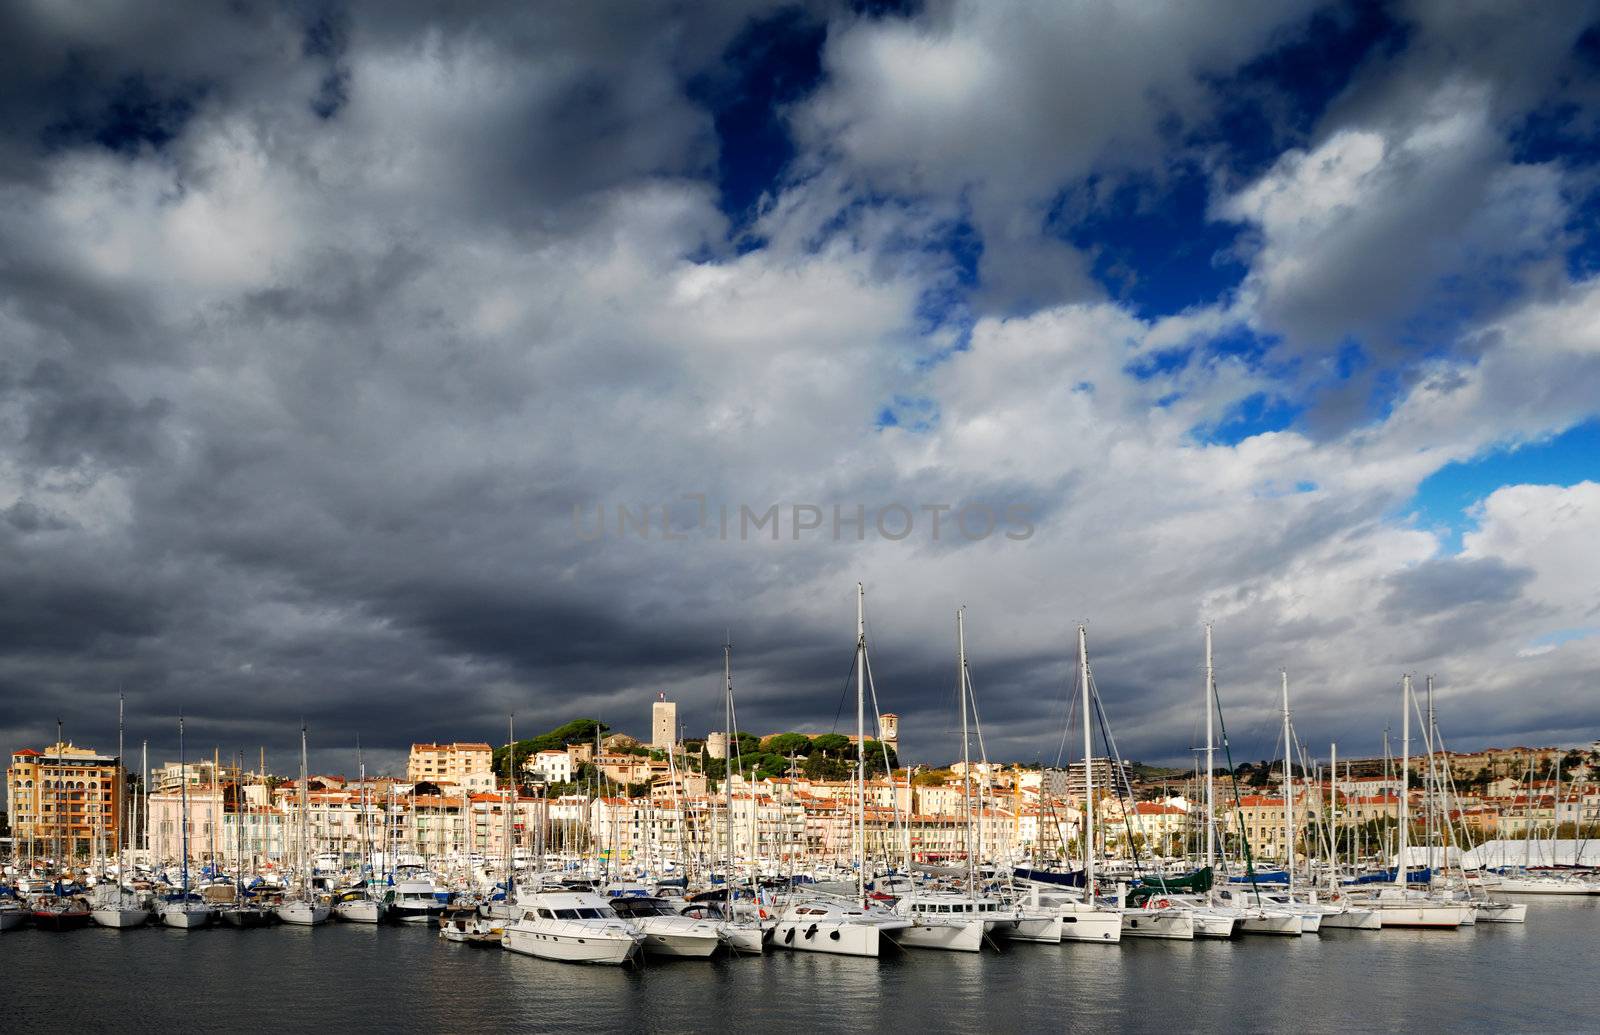 The city of Cannes, France by akarelias